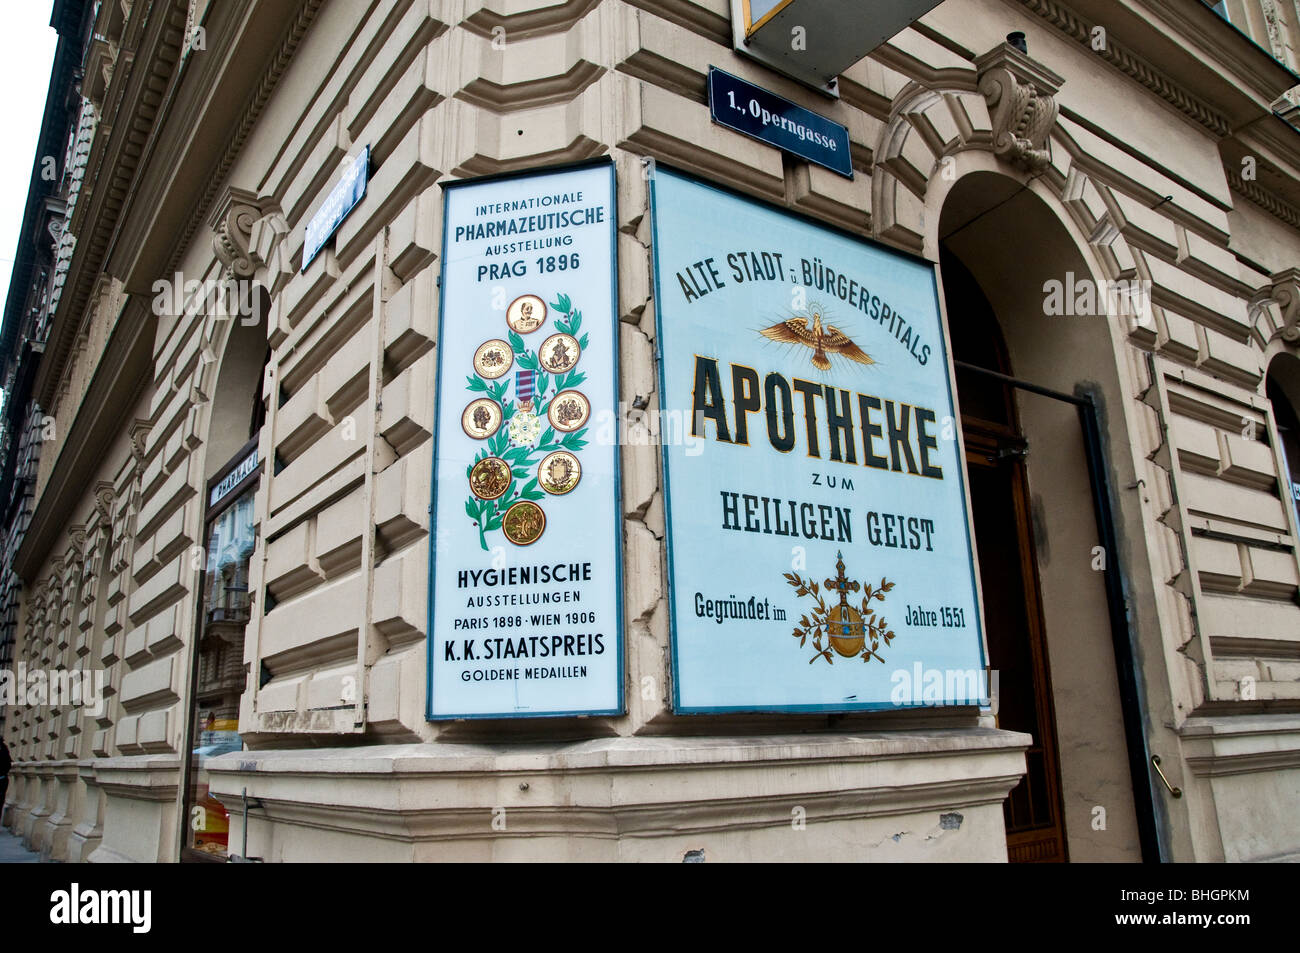 Exterior of a drugstore or pharmacy in Vienna Austria Stock Photo